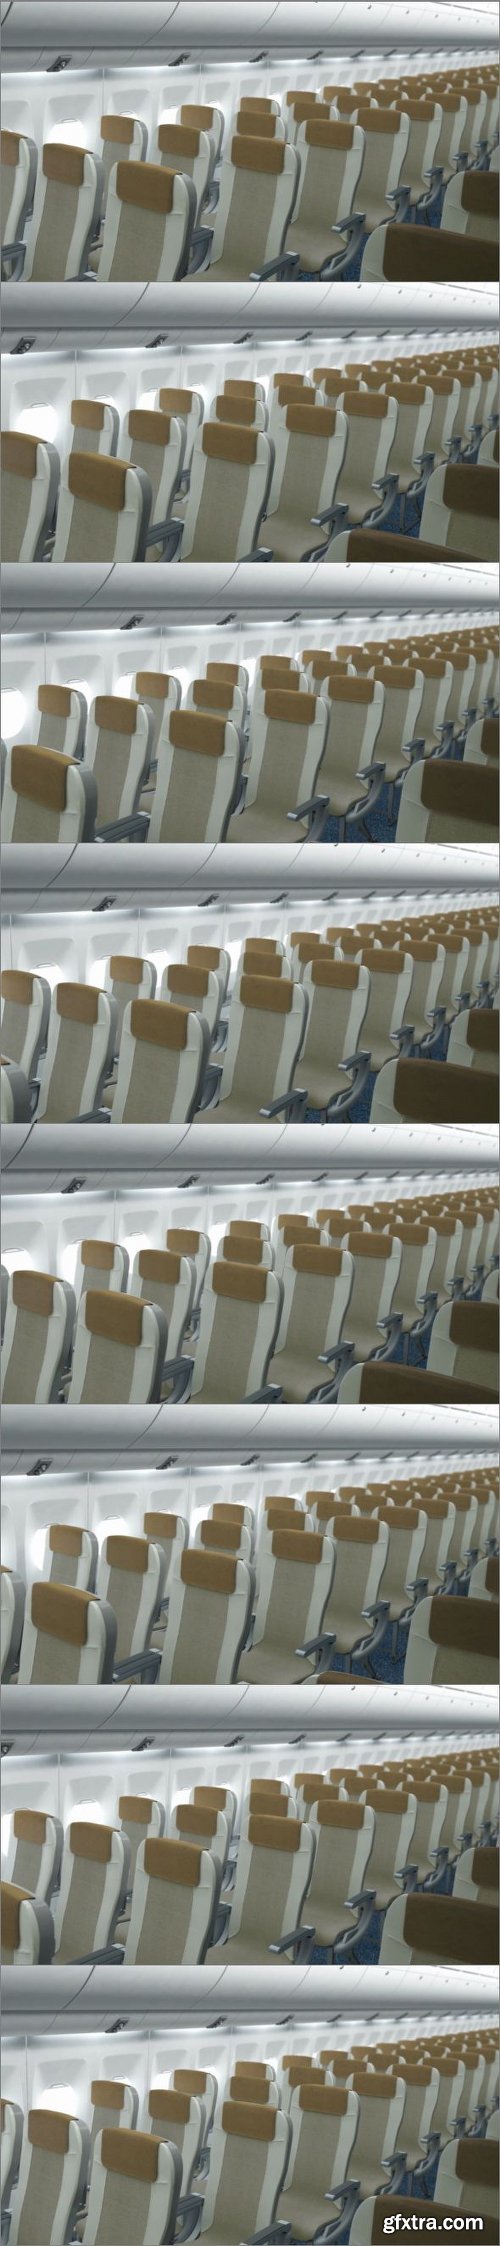 Empty Passenger Seats In Airplane Cabin. Seamlessly Looping 2